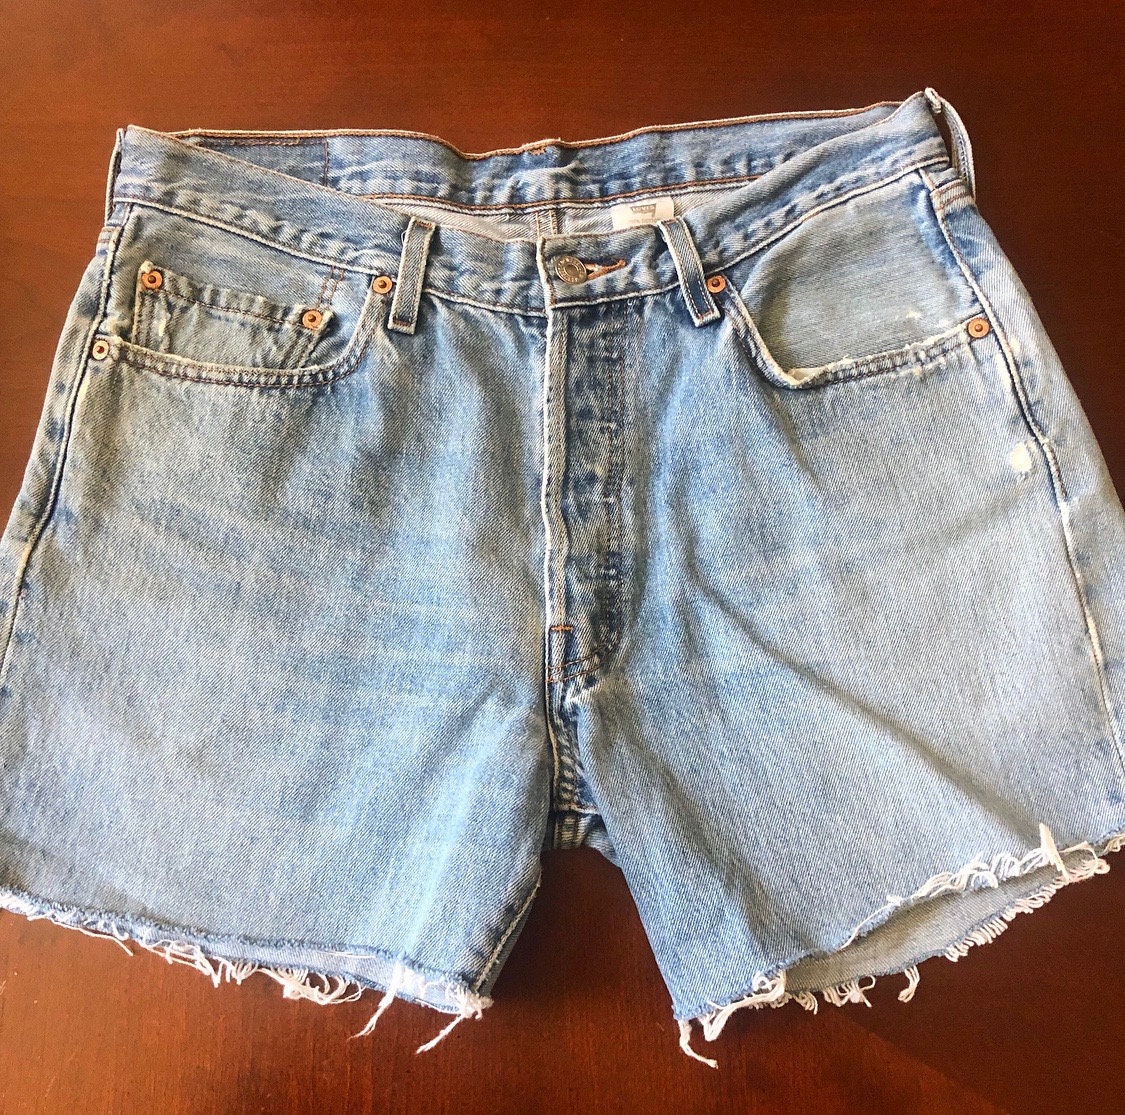 Vintage Levi's distressed cut off shorts with acid wash mark and Tweety ...